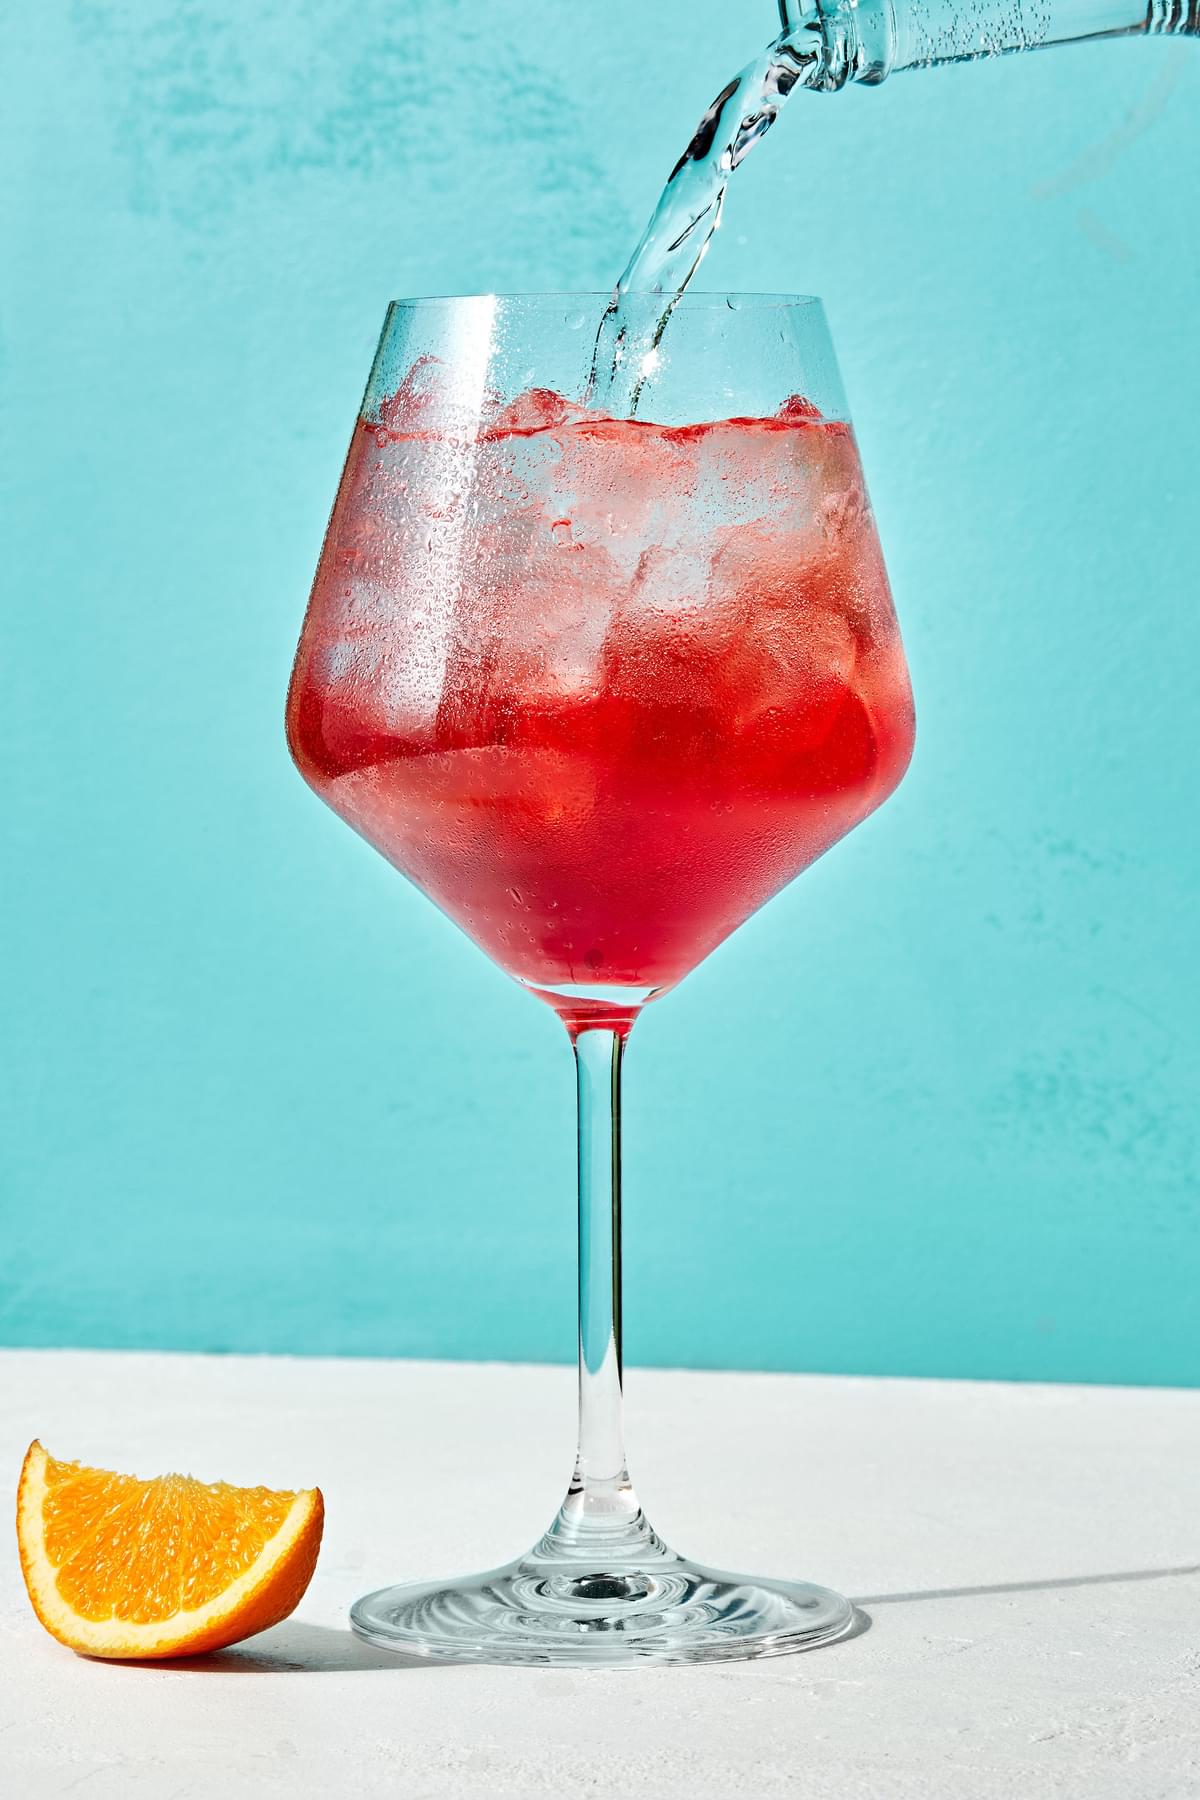 Sparkling water being poured into a wine glass with ice, prosecco and campari to make a campari spritz